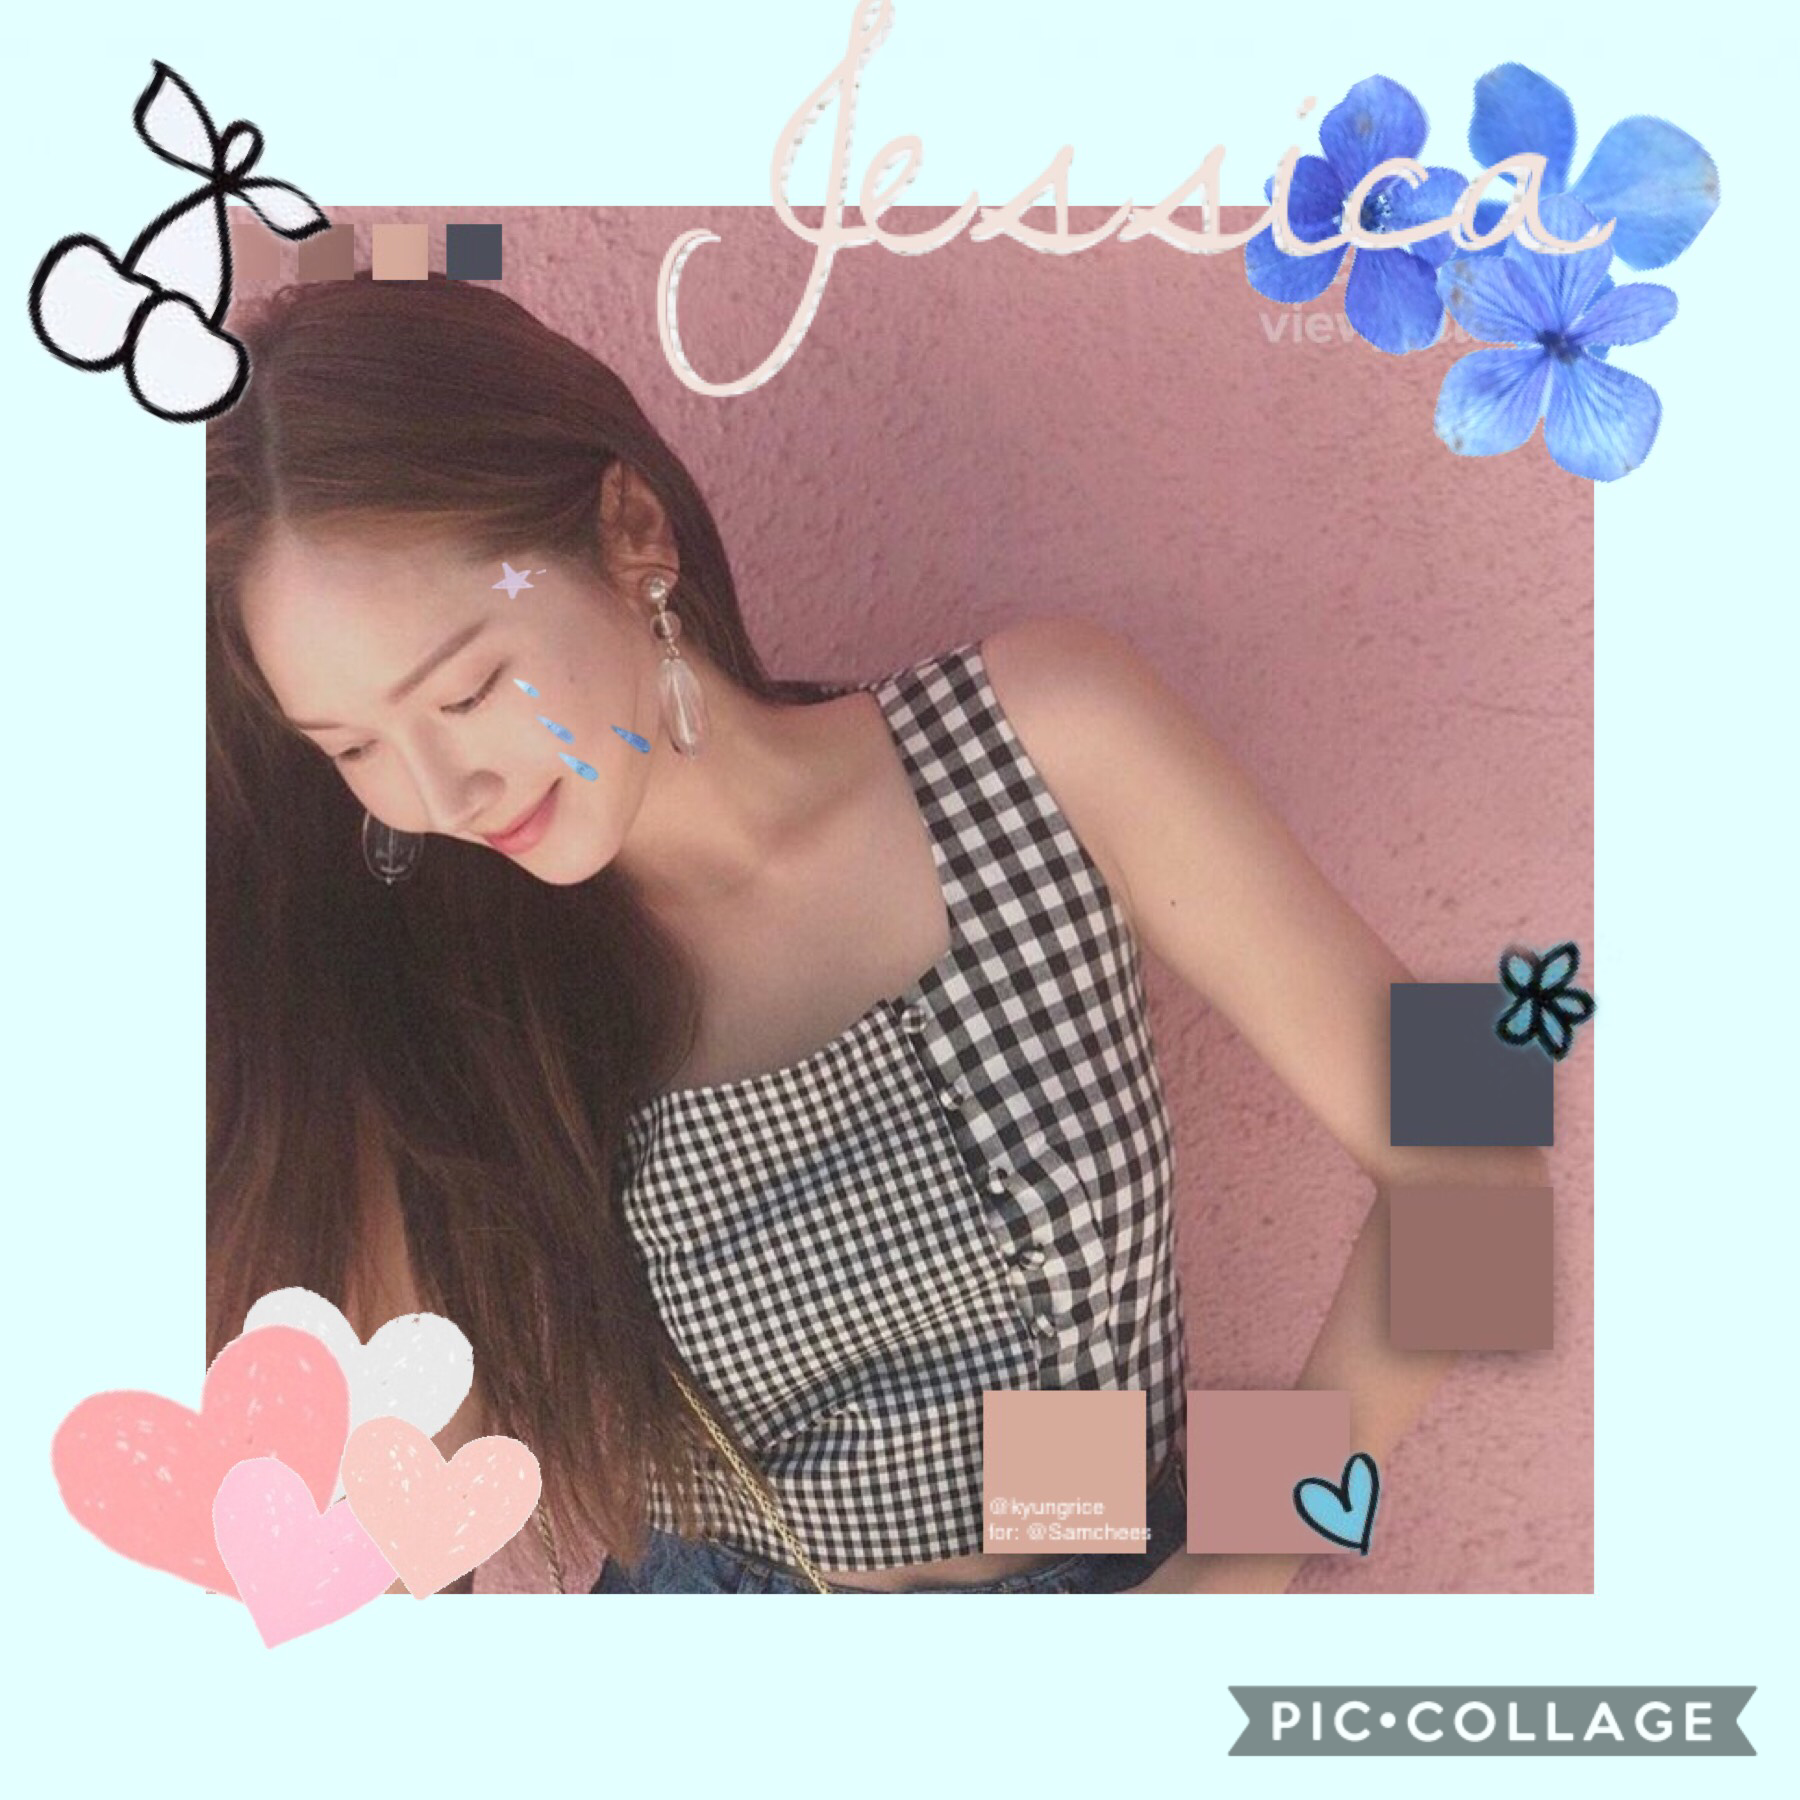 💘jEsSIcA💘↓

for: @Samchees
It’s bad...sorry!☹️☹️💓